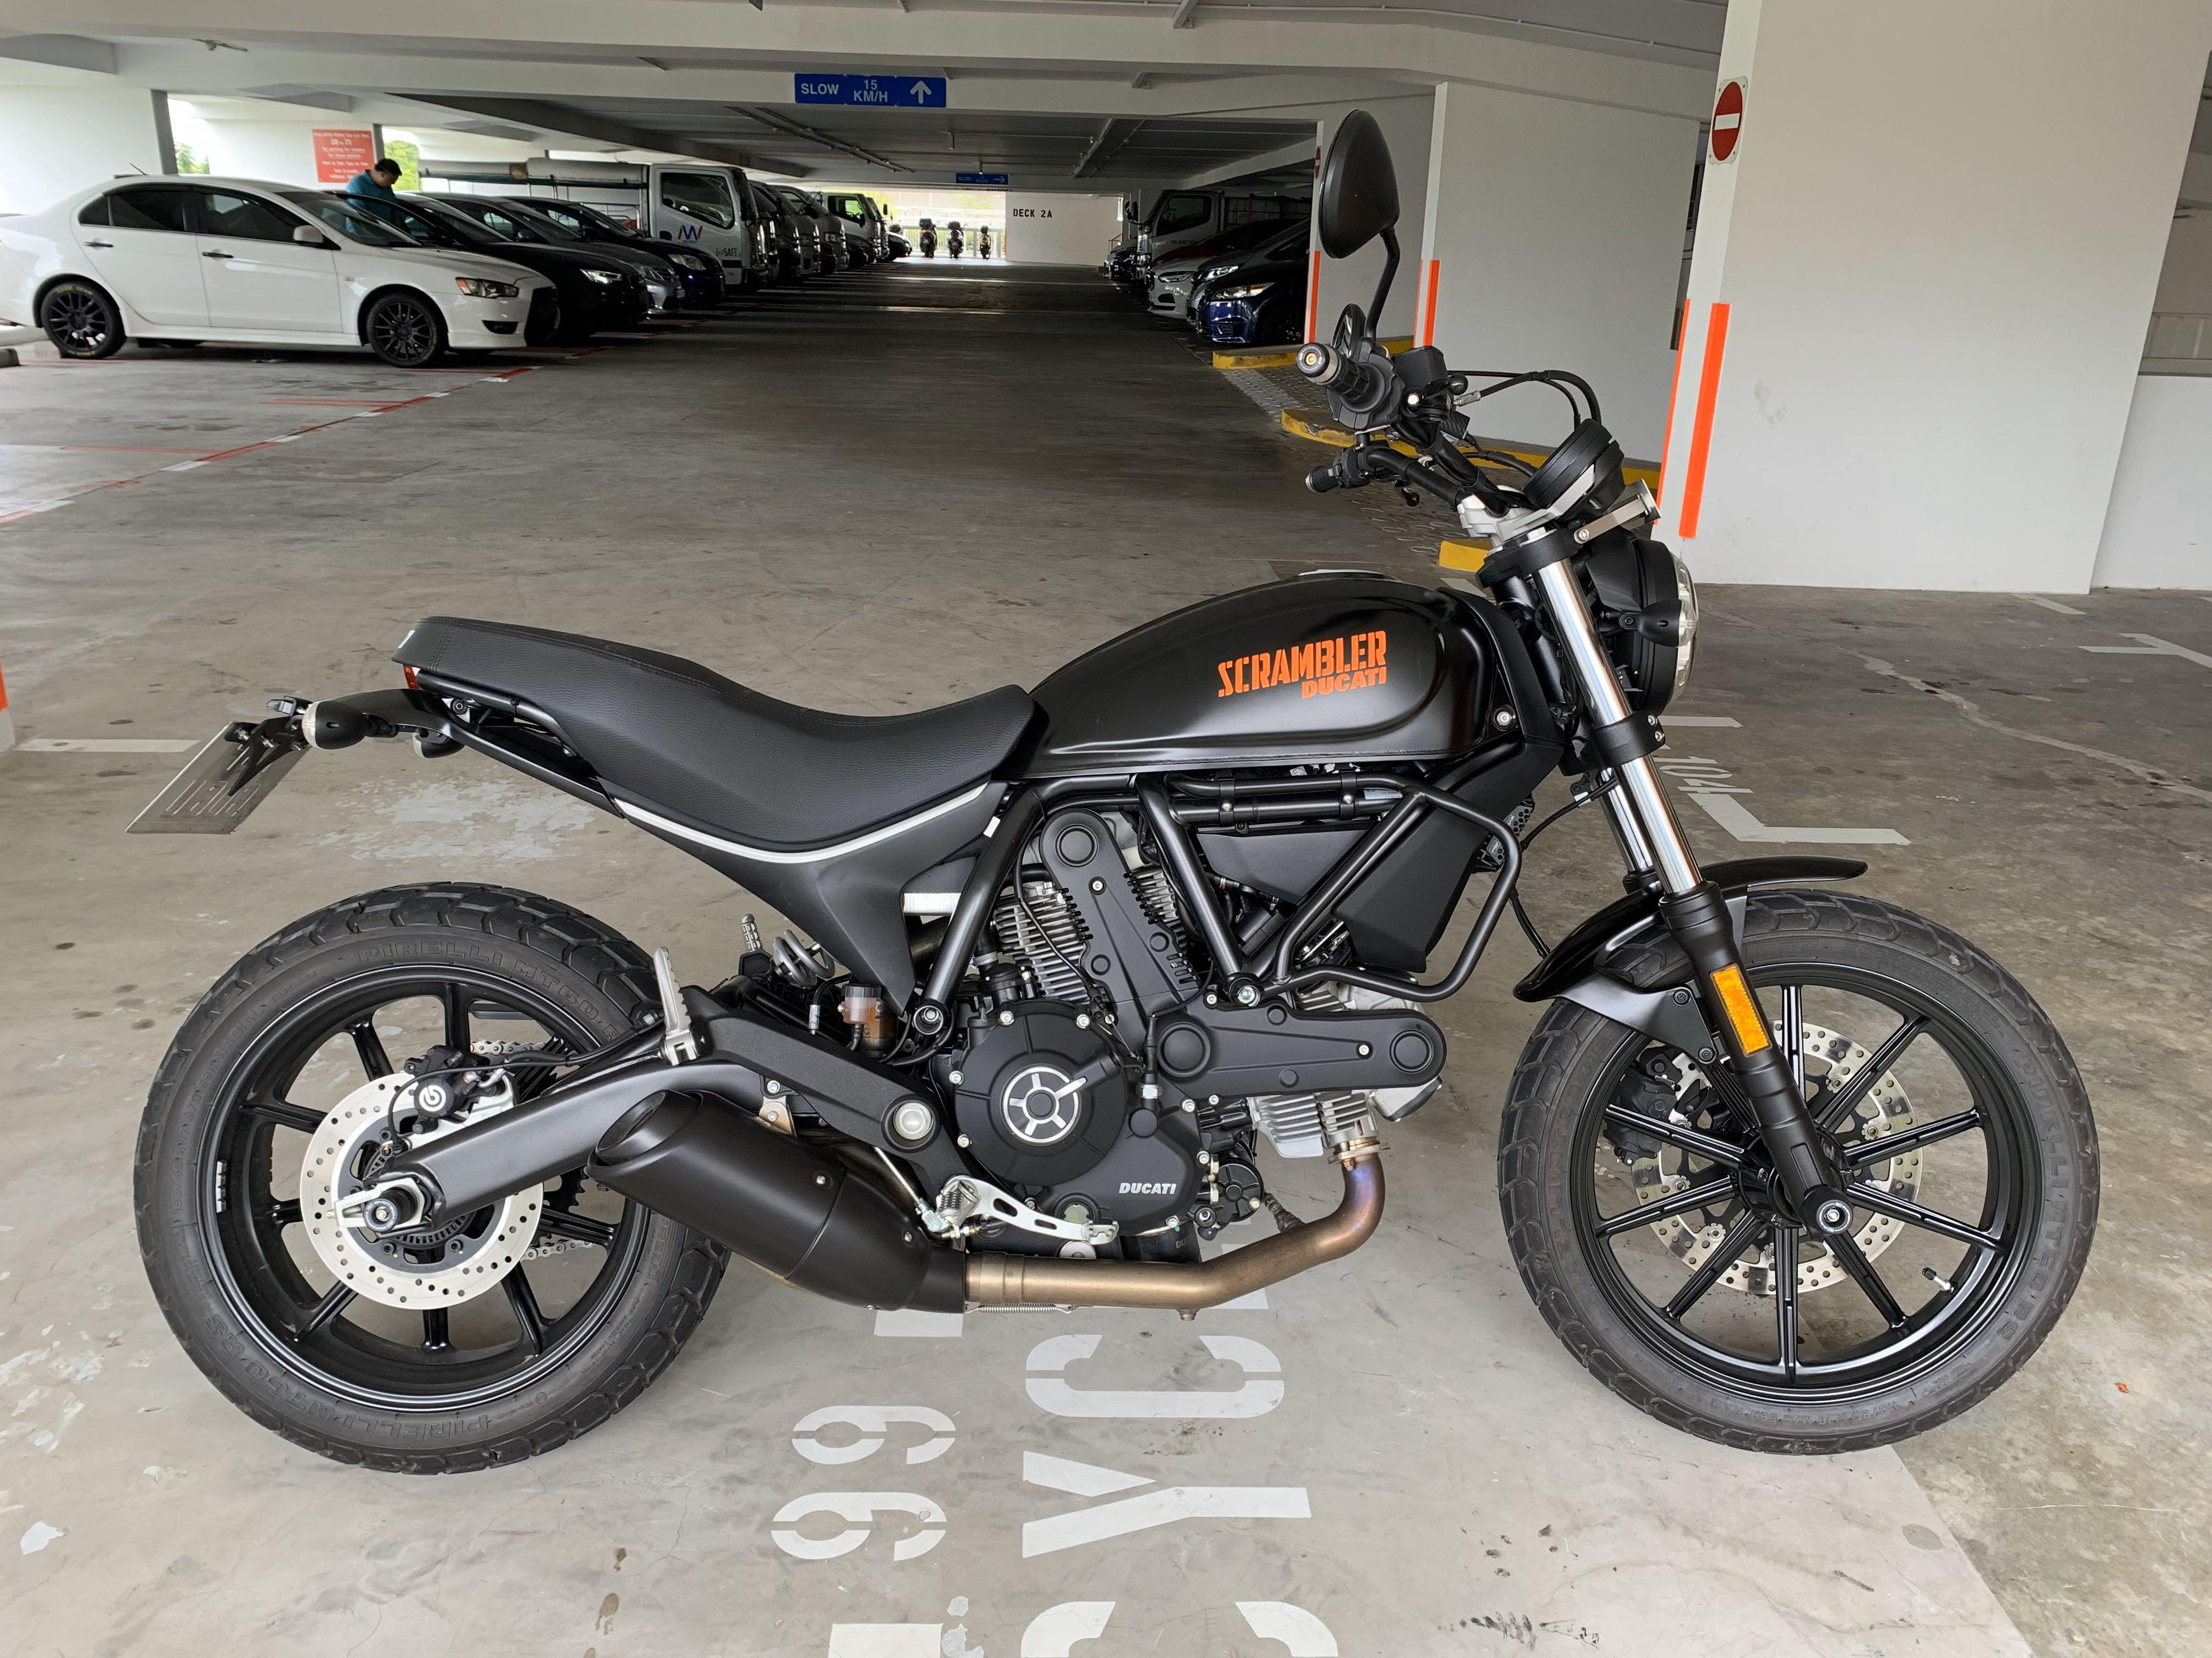 Ducati Scrambler Sixty2 400cc, Motorcycles, Motorcycles for Sale, Class